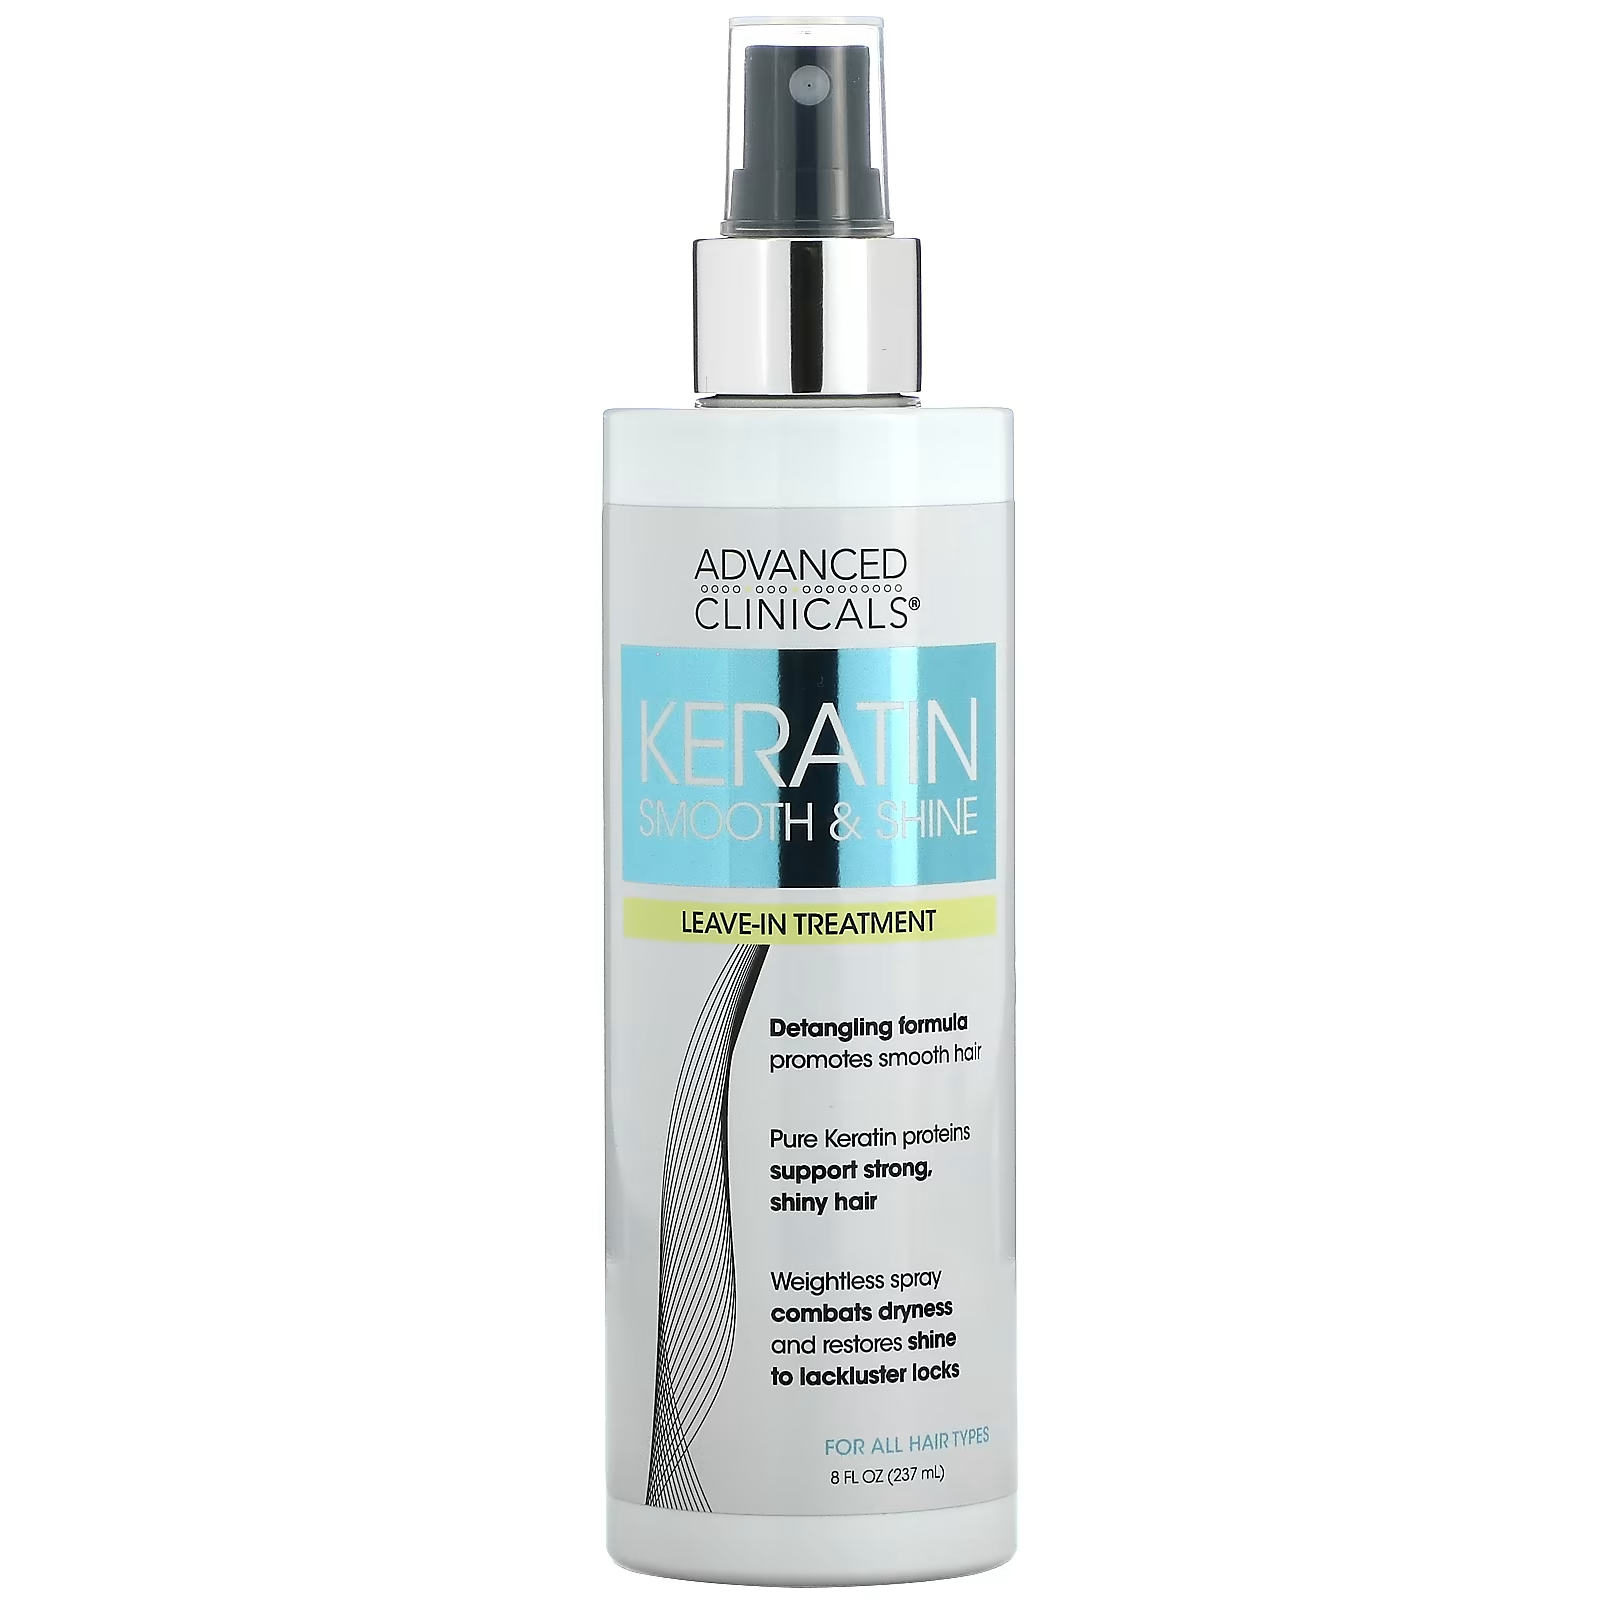 Advanced Clinicals Keratin Smooth & Shine Leave in Treatment conditioner spray 237 ml